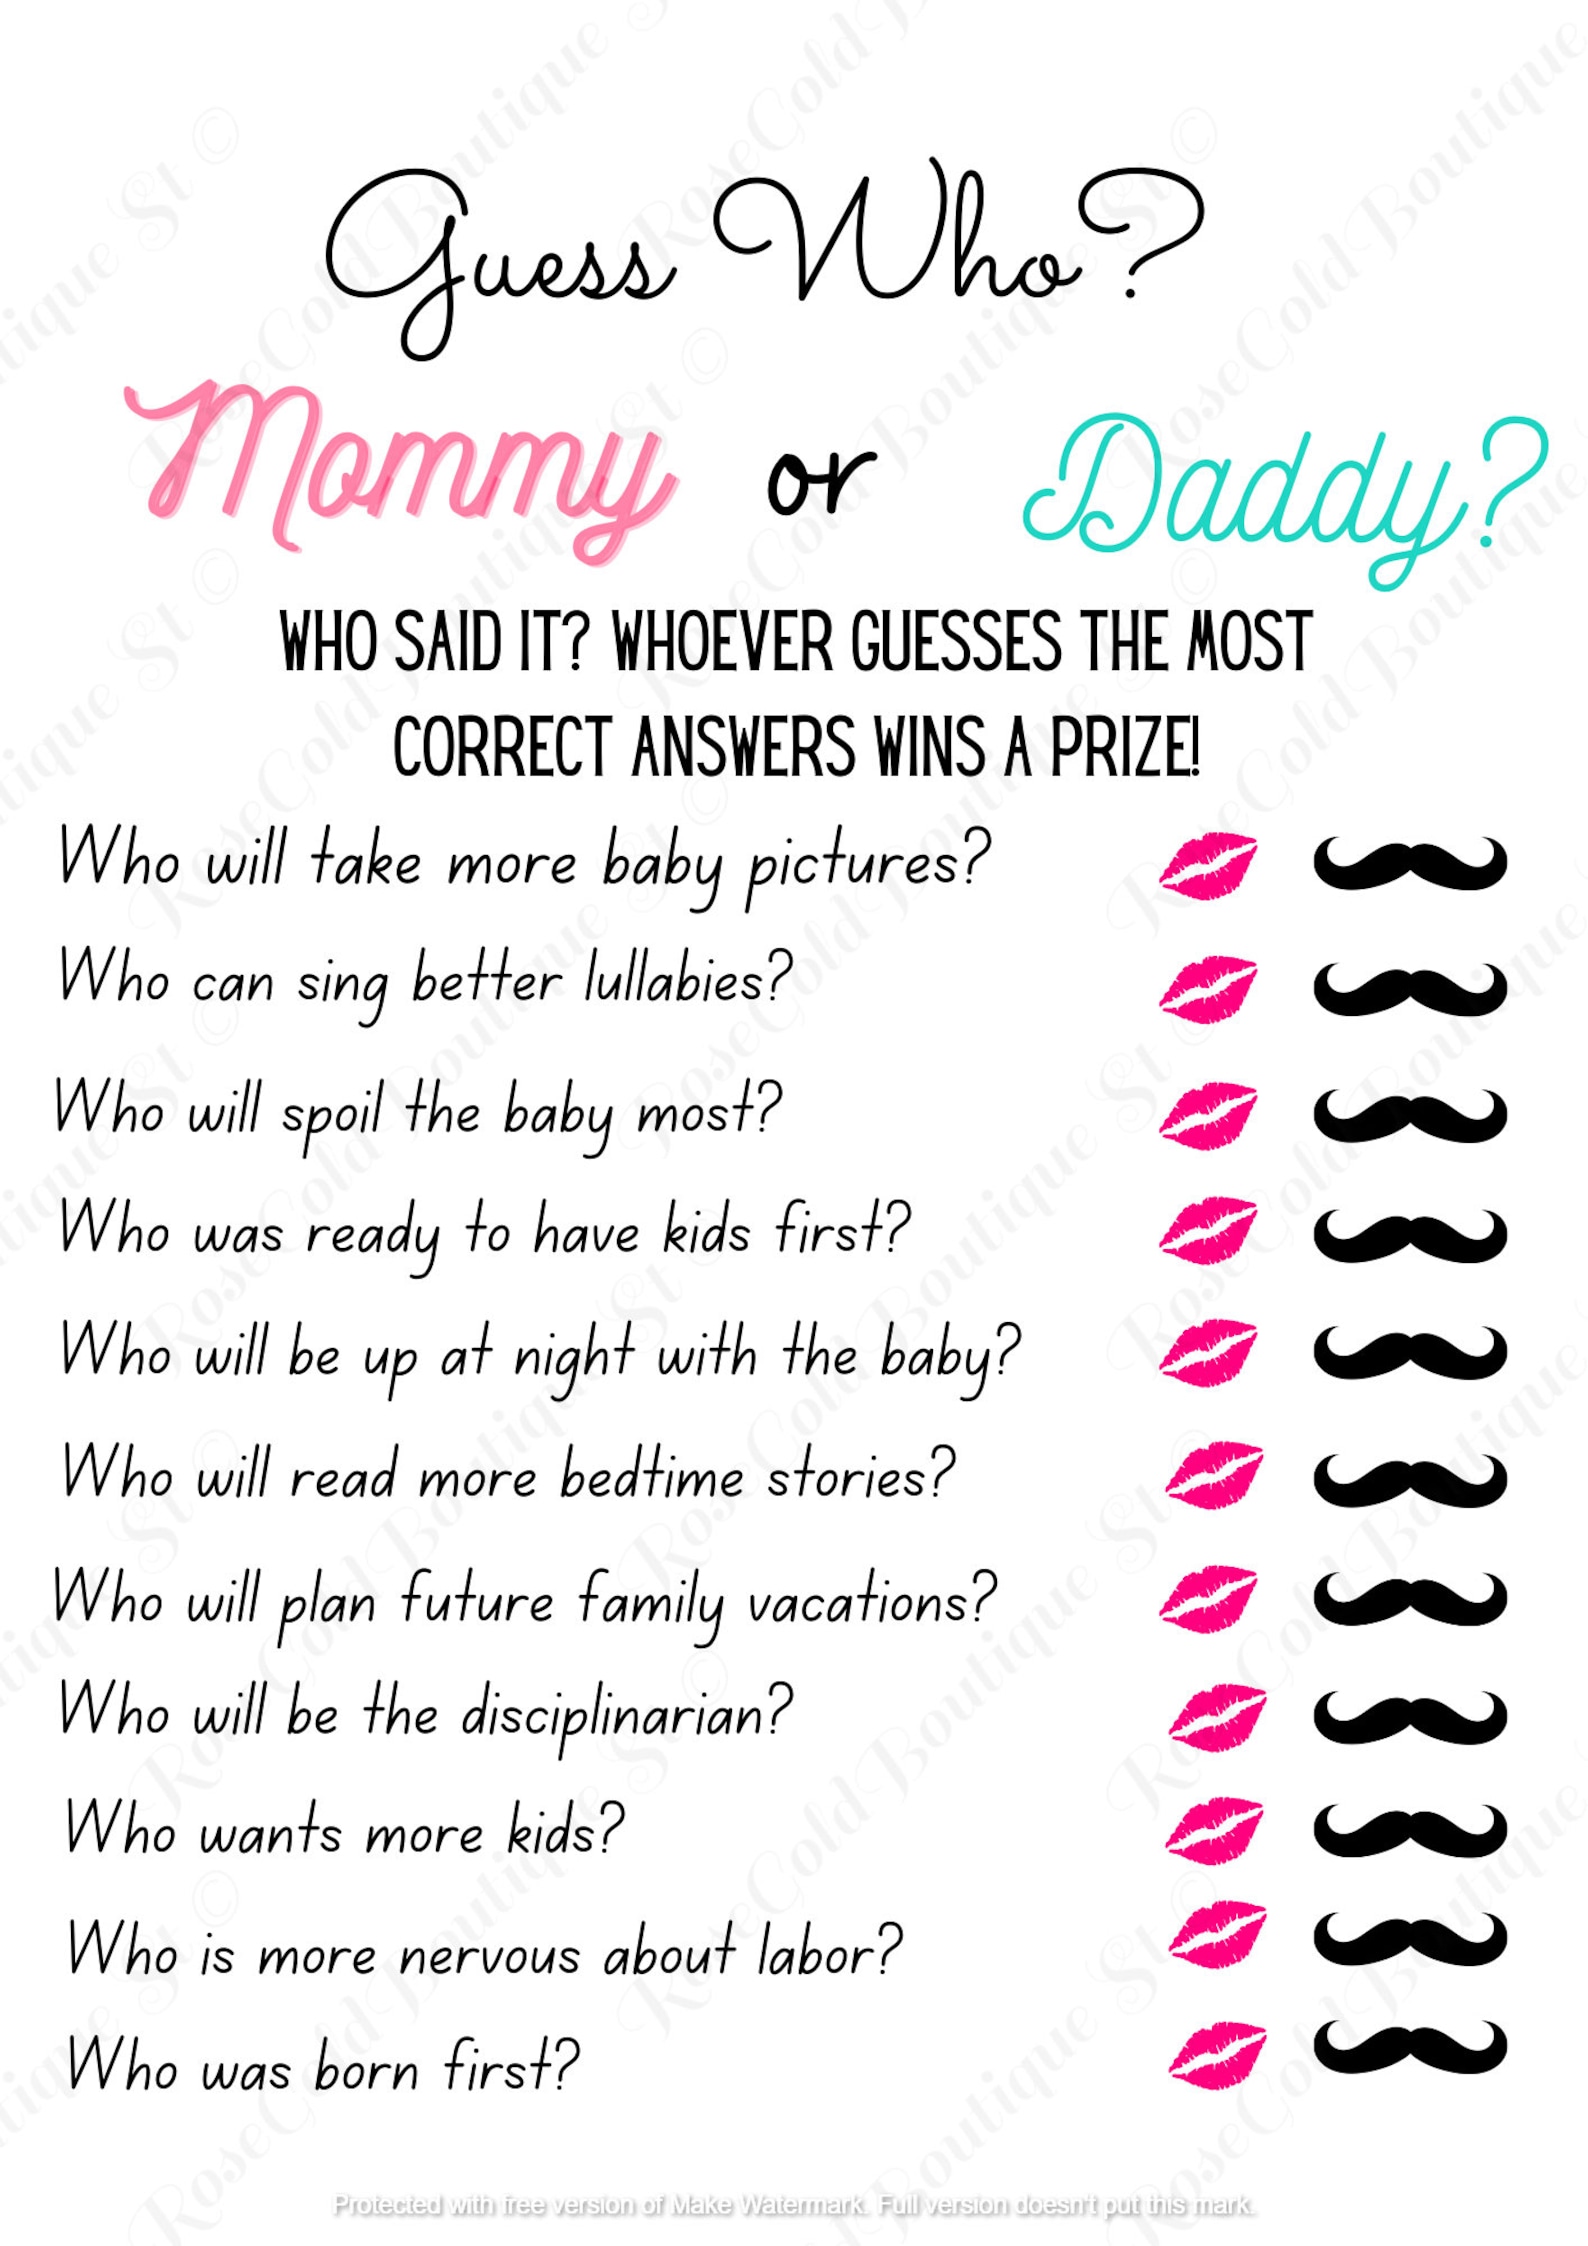 Printables for a Baby Shower, Baby Shower, Baby Shower Game, Baby ...